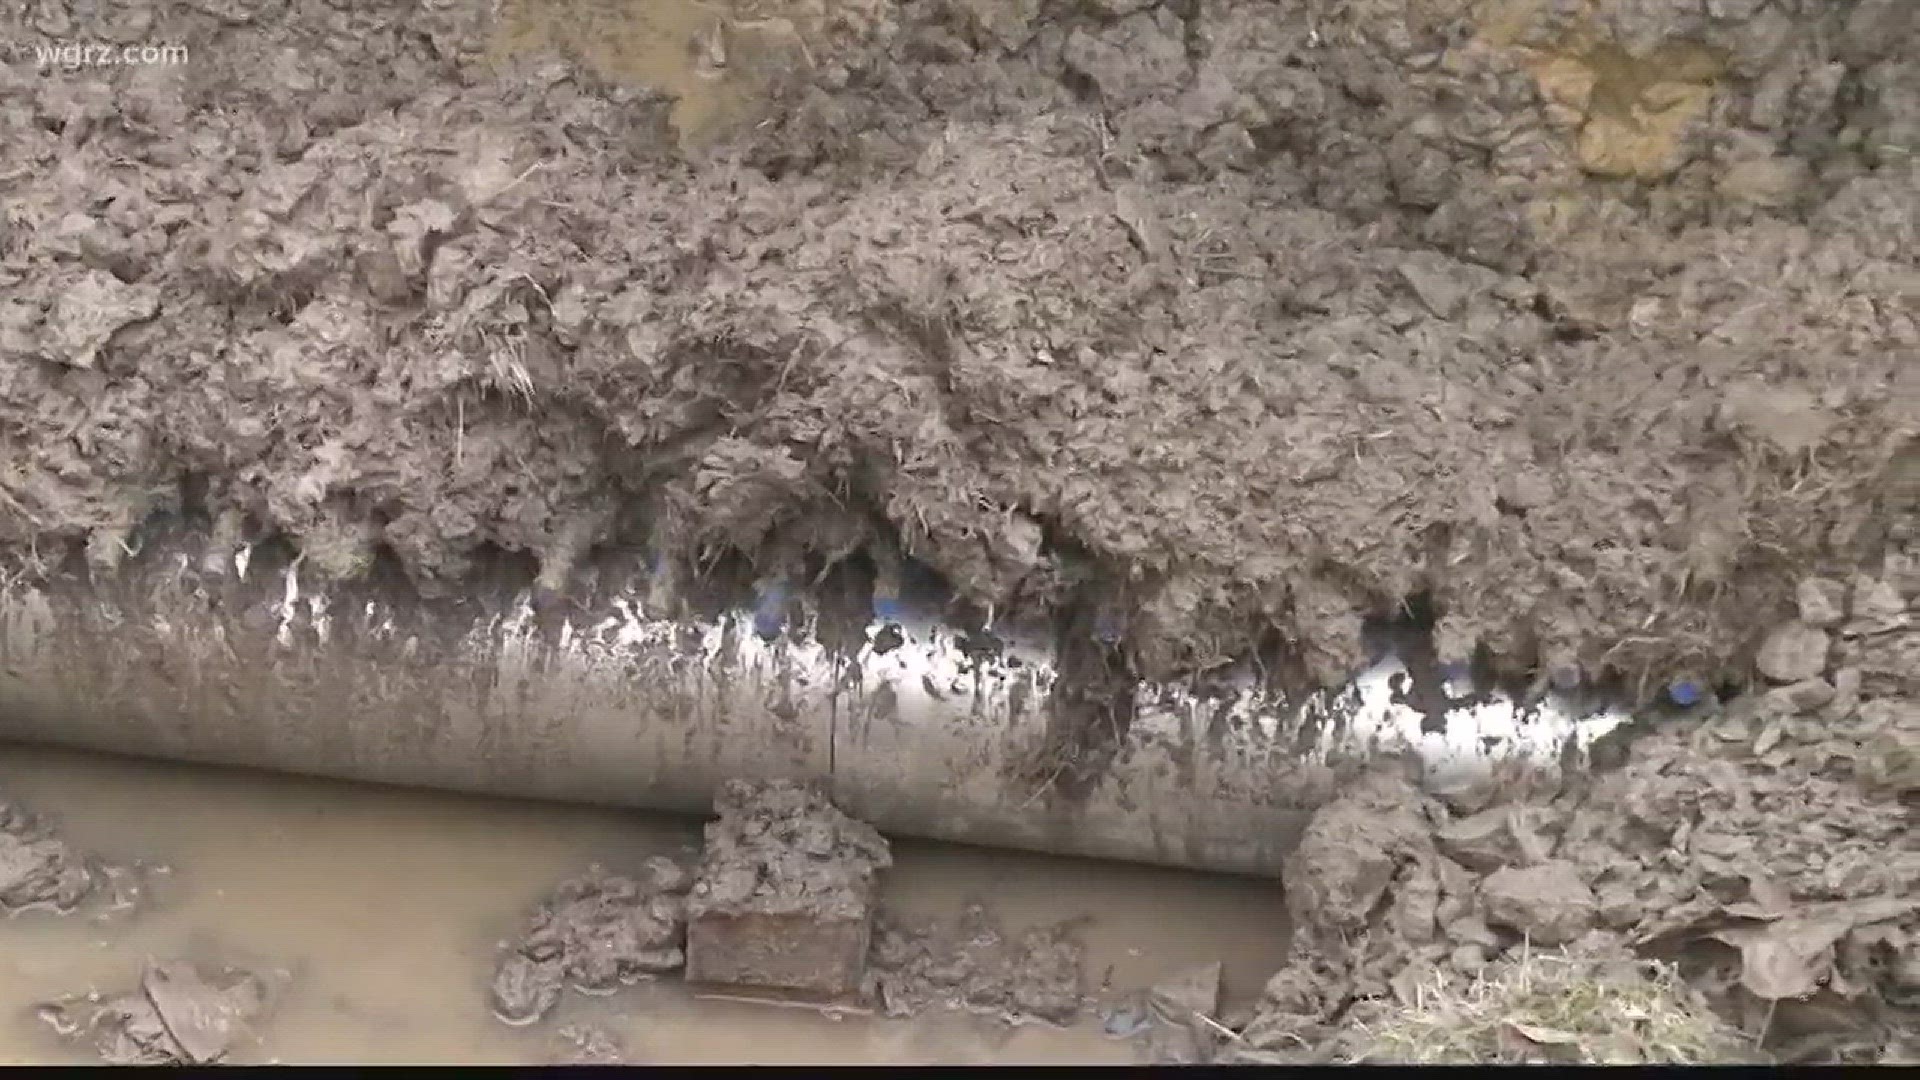 Residents in the town of Clarence were told this morning that there was a water main break in the town, later the Erie County Water Authority said it was a miscommunication.